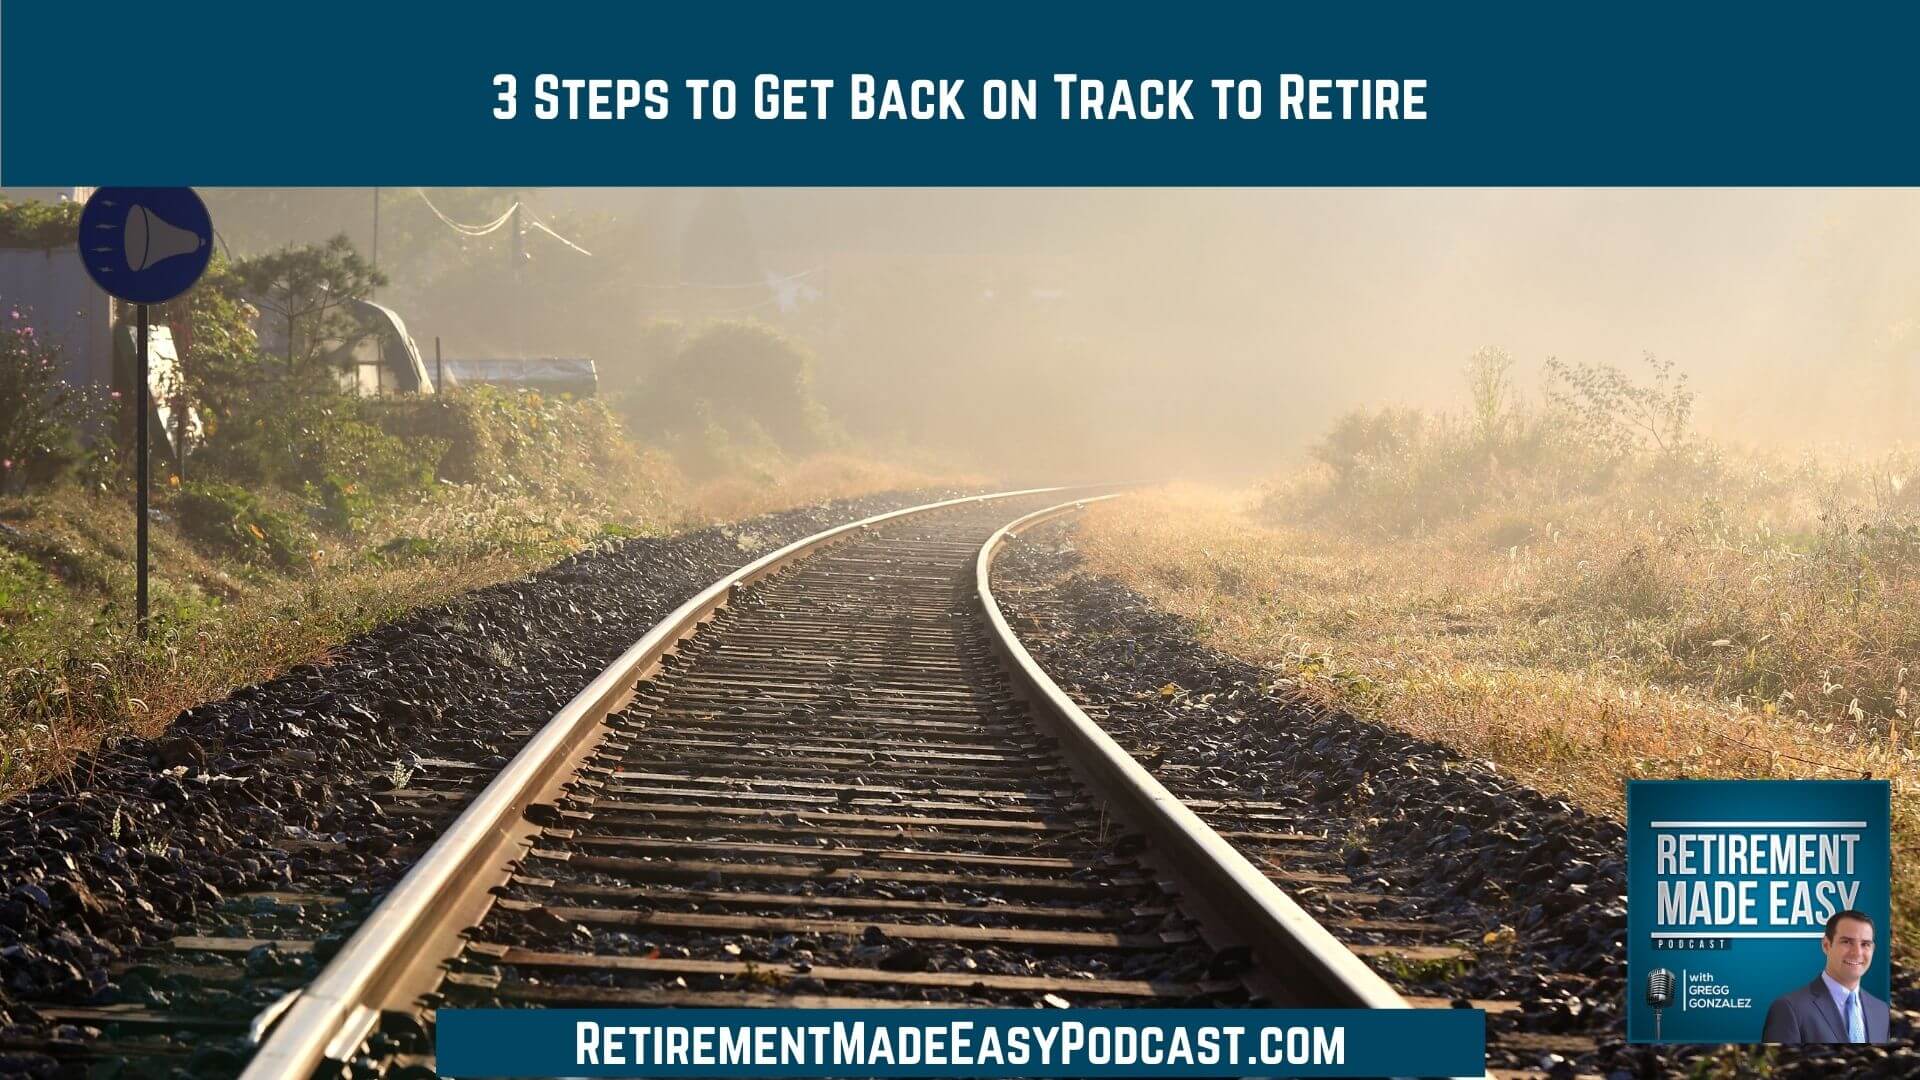 3 Steps to Get on Track to Retire